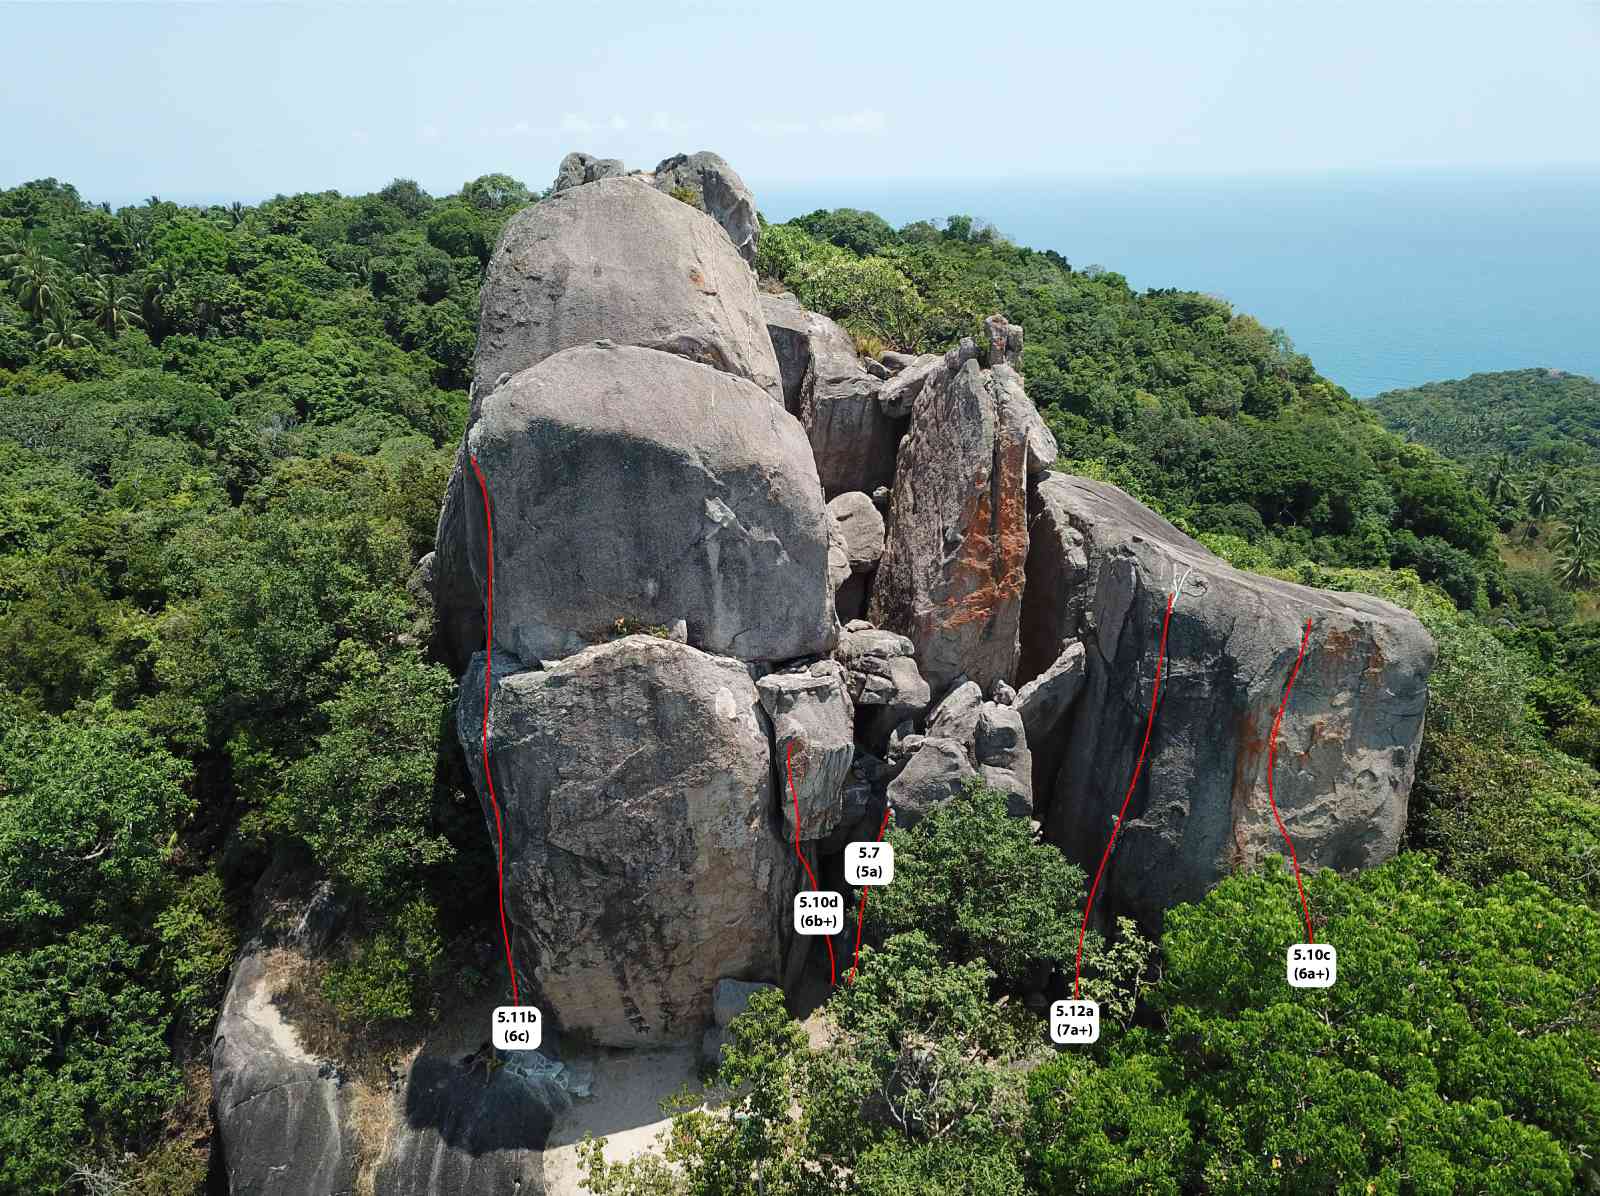 The crags at Koh Tao